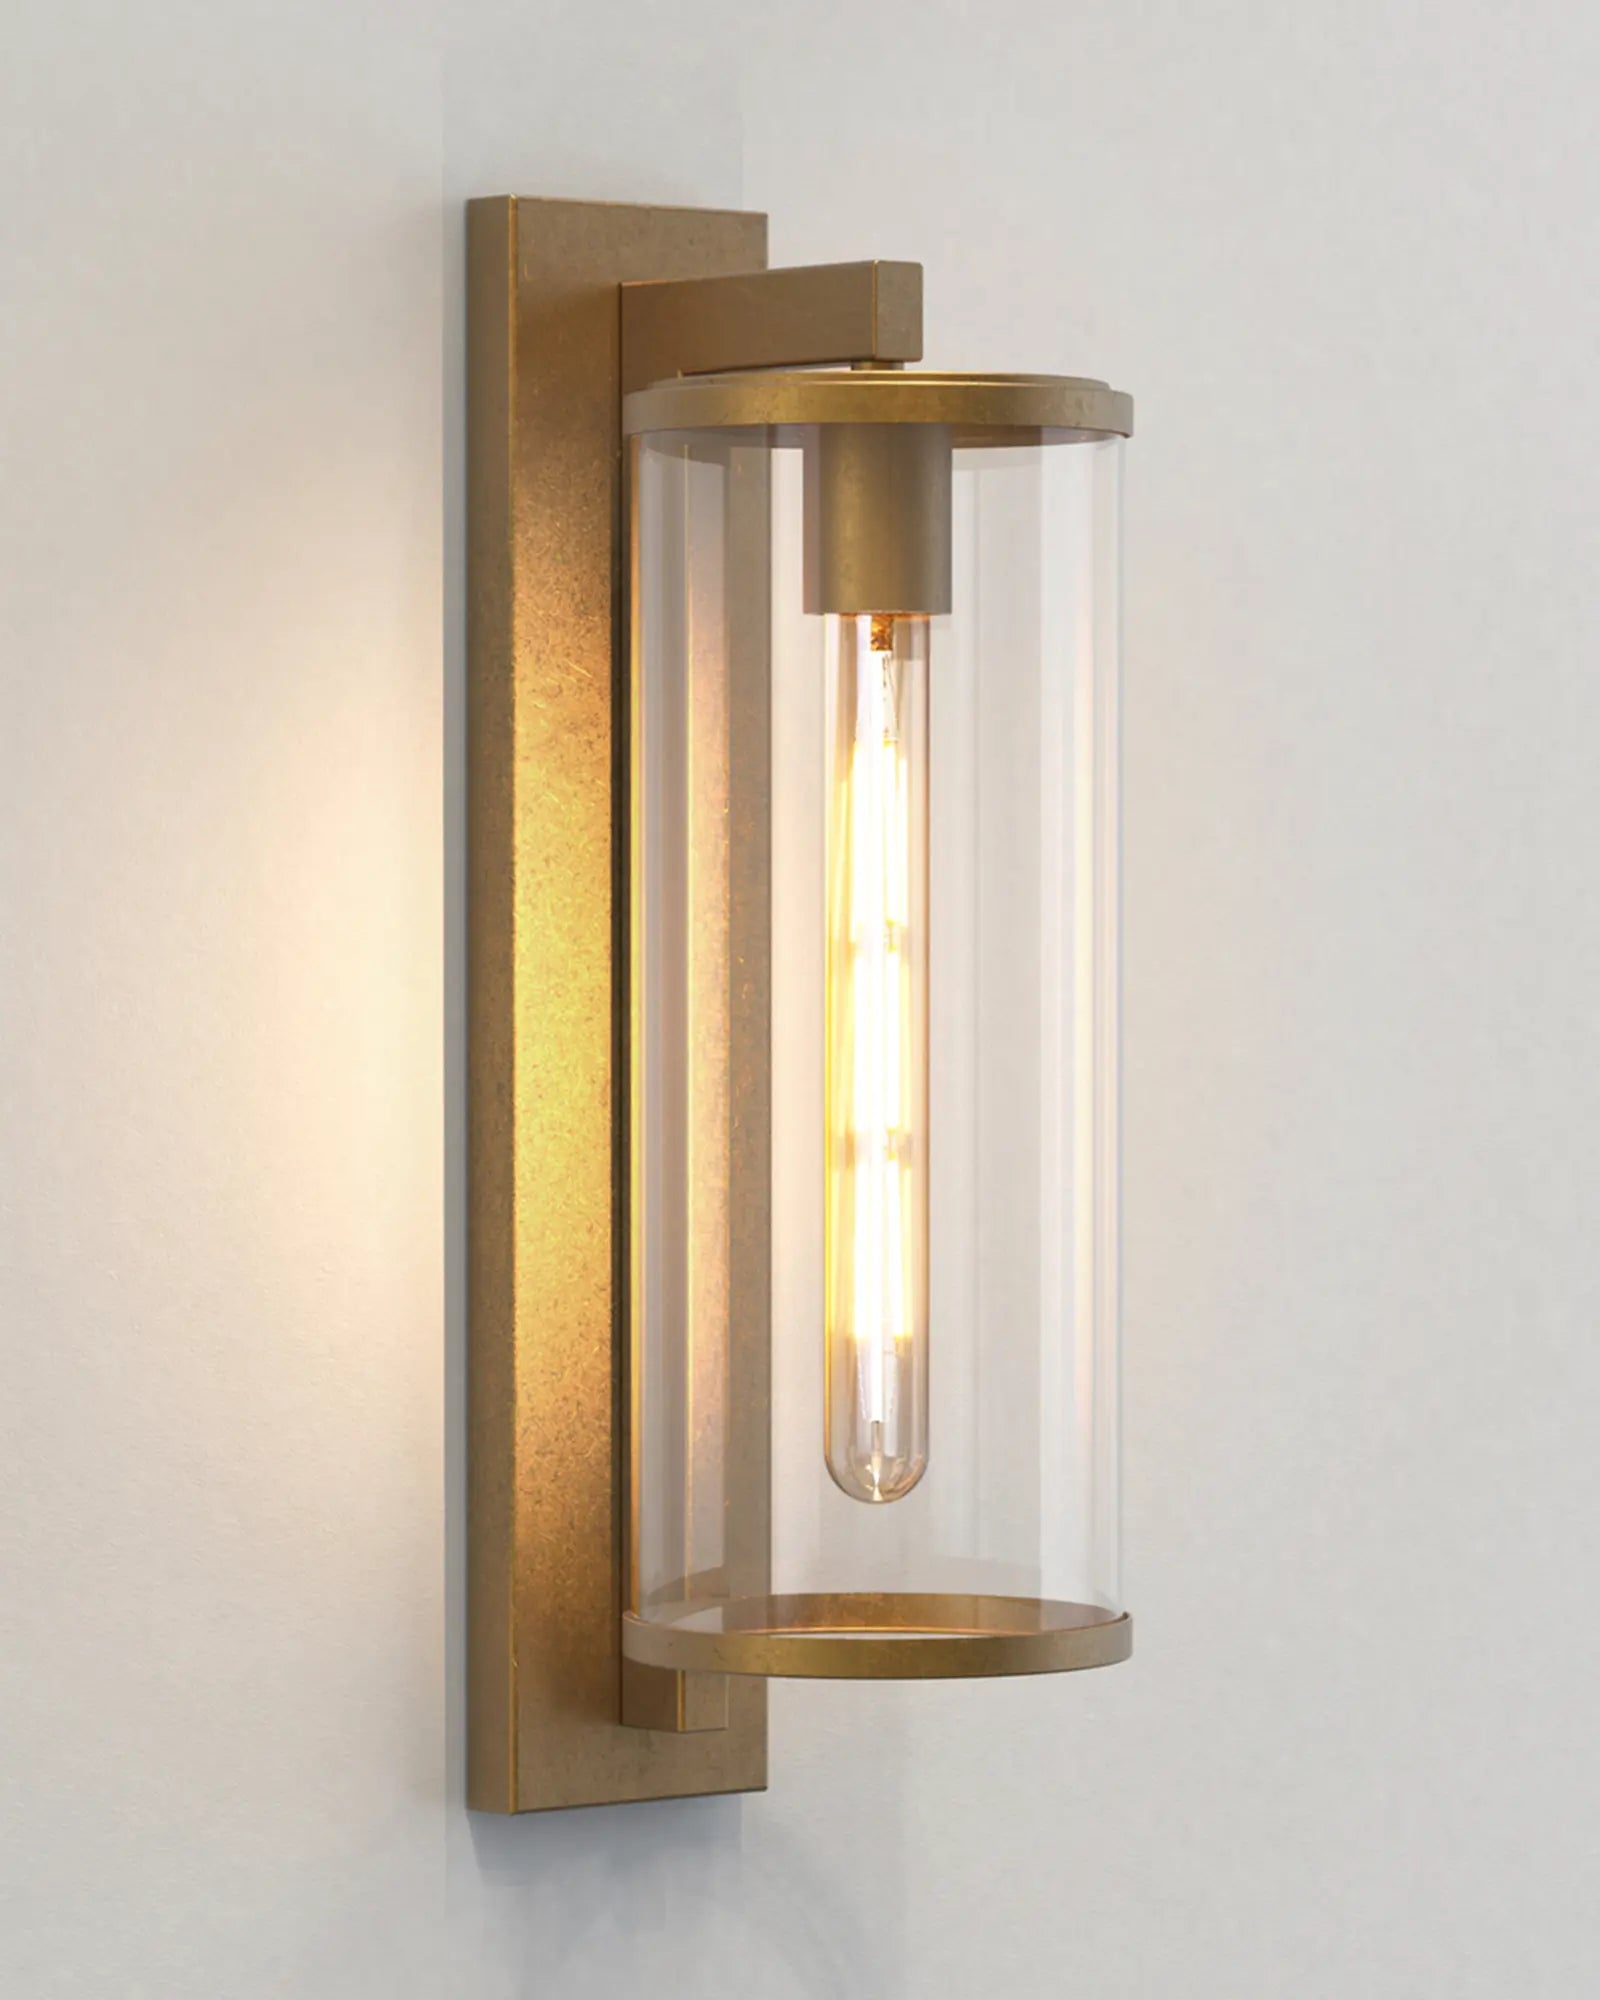 Pimlico Outdoor lantern style metal and glass wall light brass 500